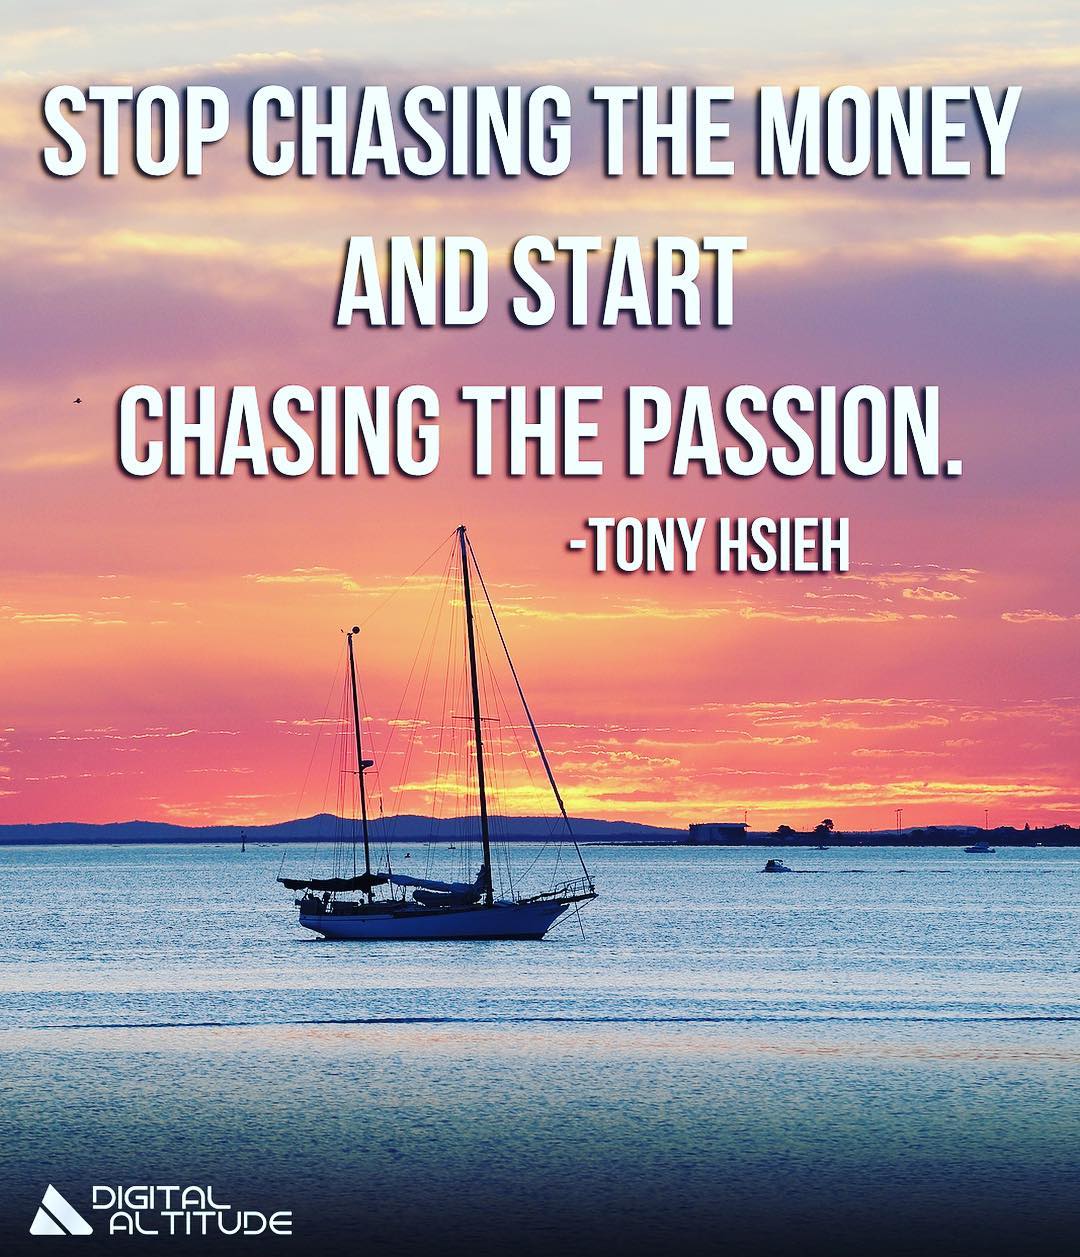 Stop chasing the money and start chasing the passion. - Tony Hsieh